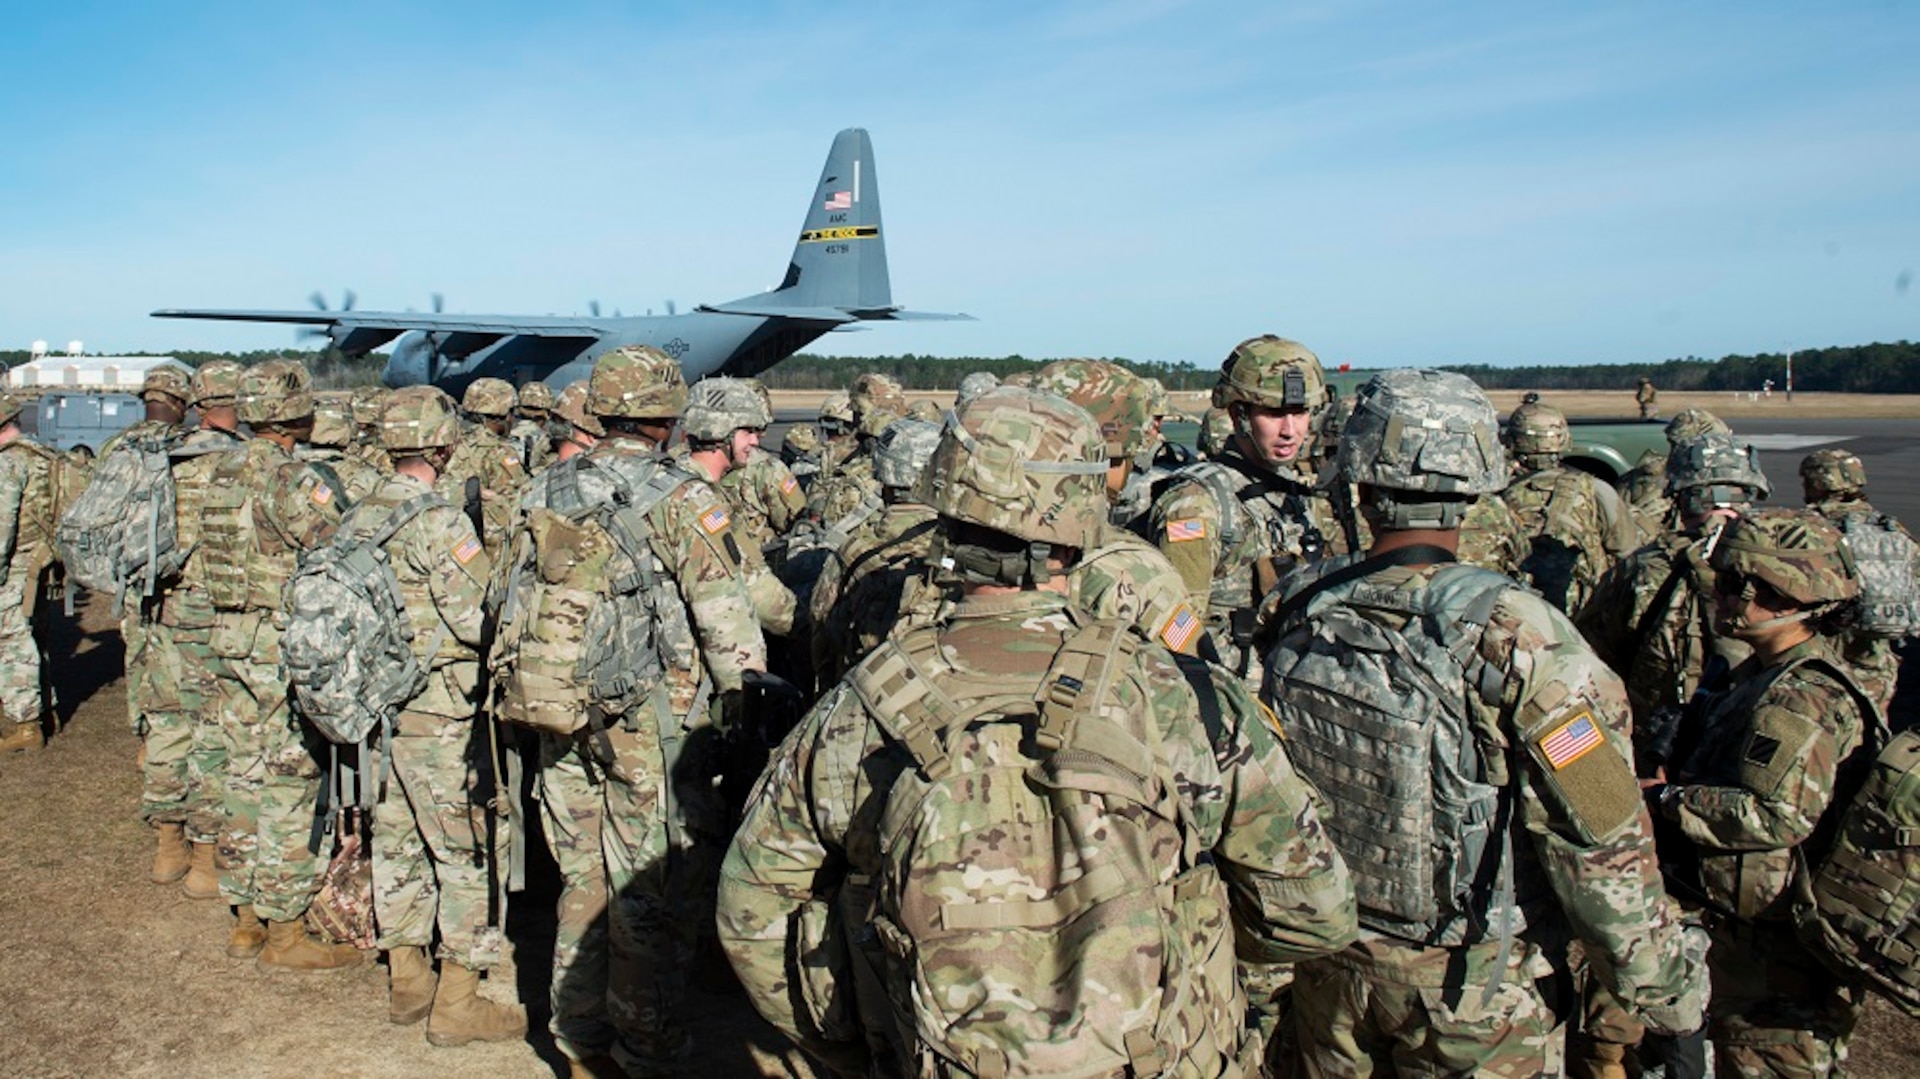 Military members line up for transportation to an exercise location.